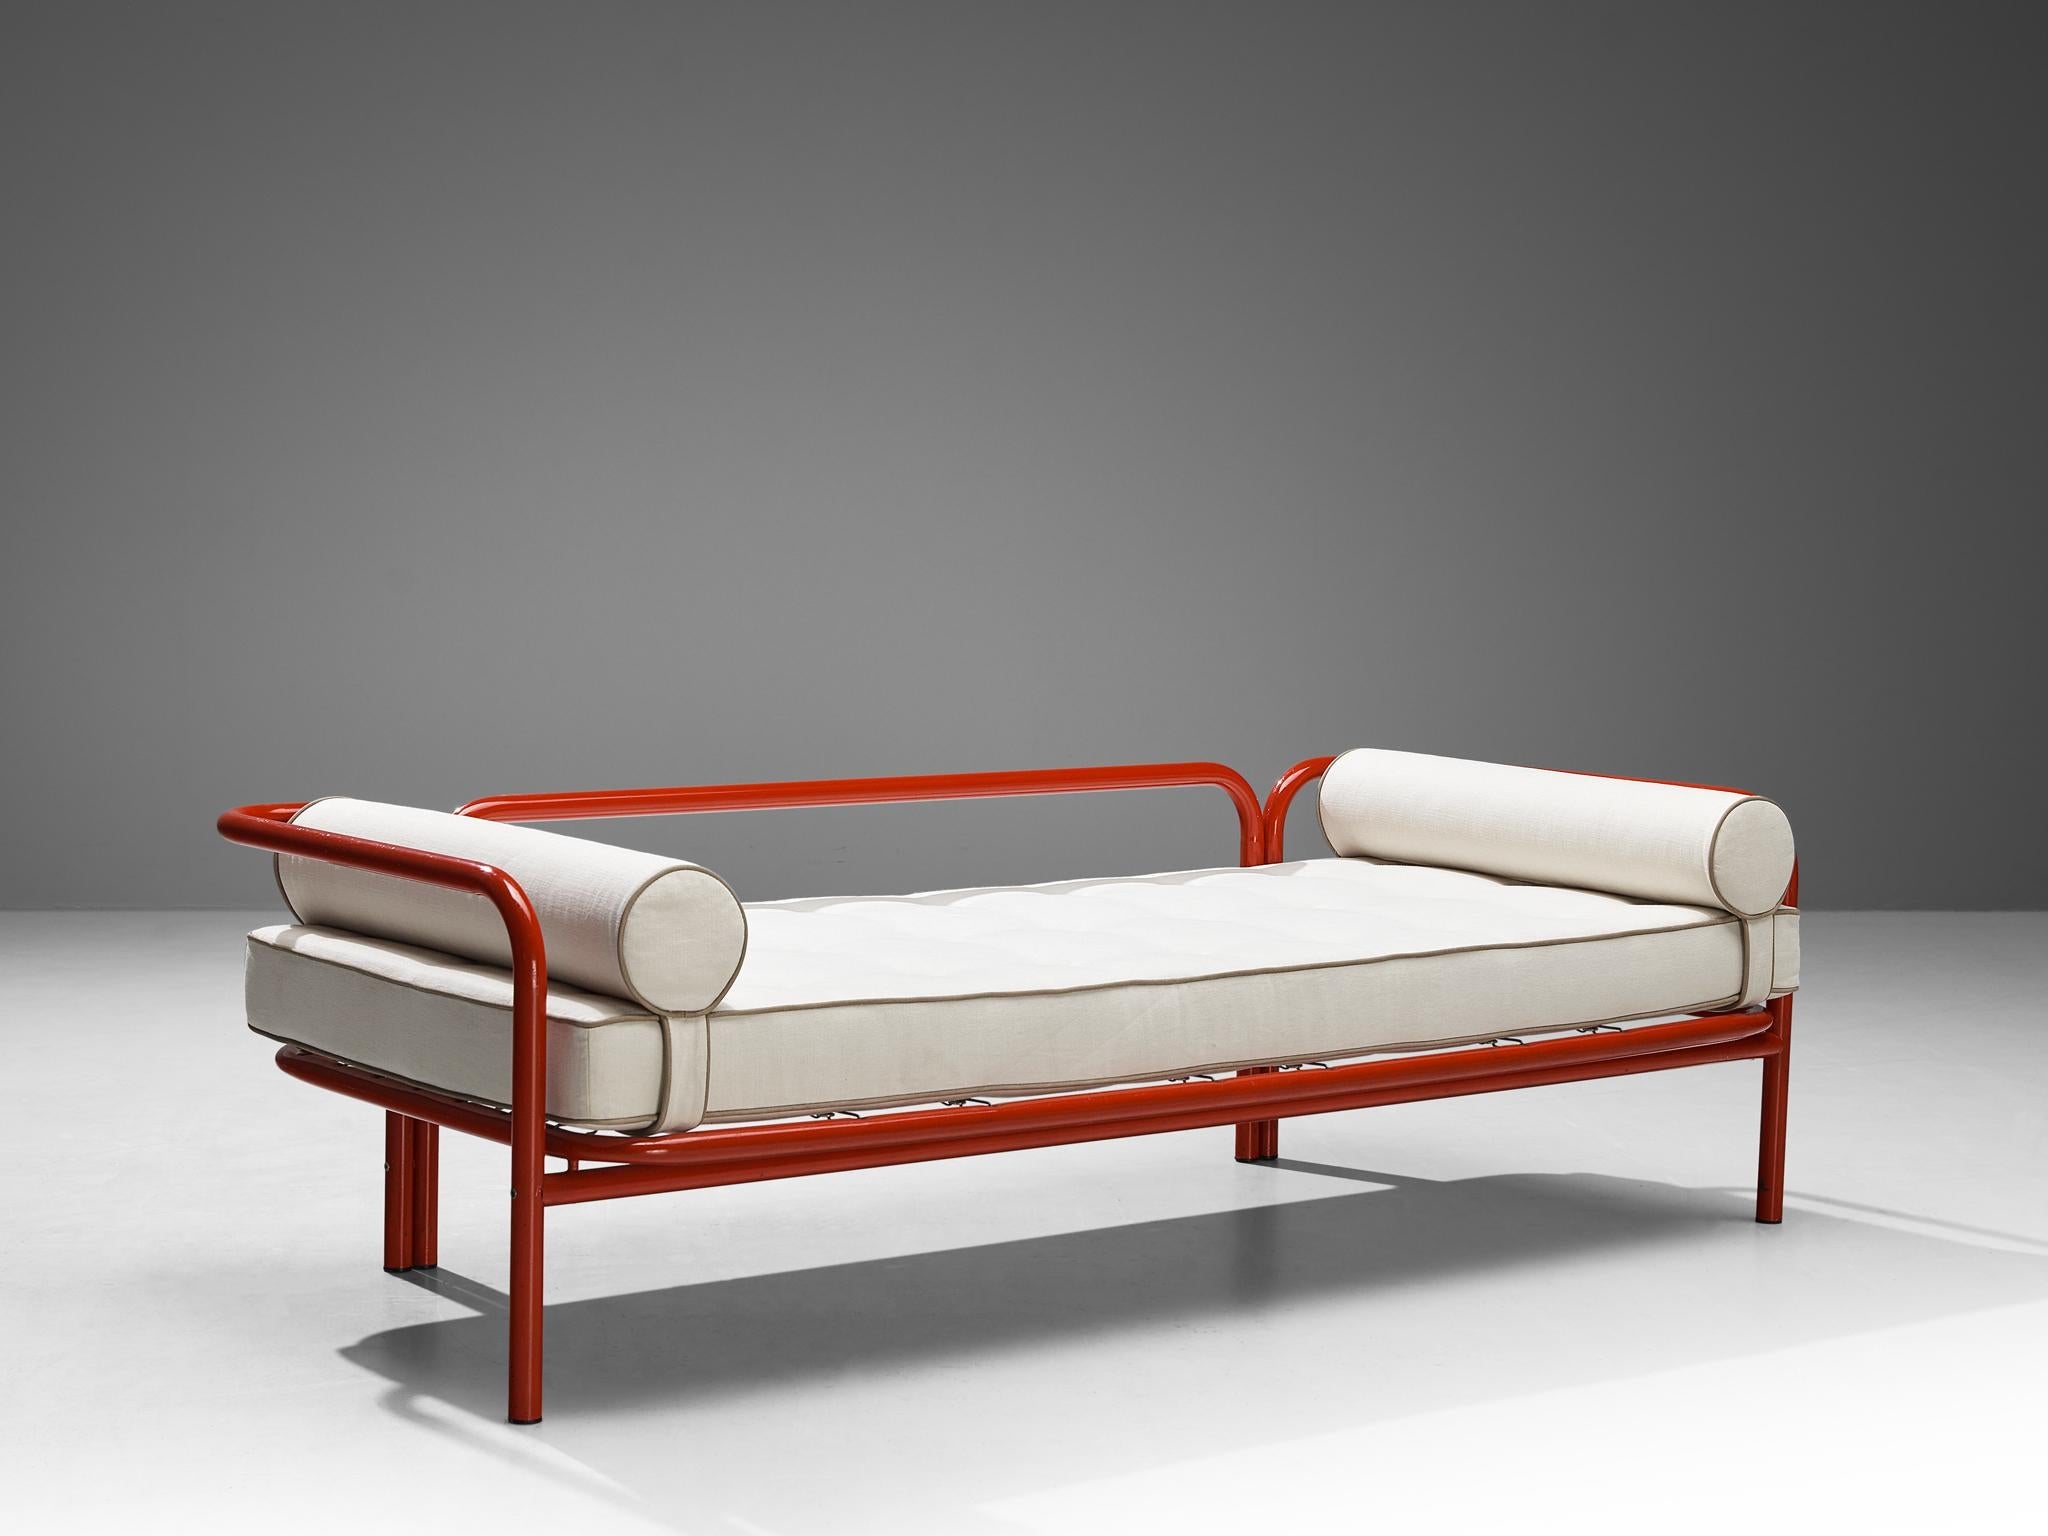 Gae Aulenti for Poltronova 'Locus Solus' Daybed in Red Steel